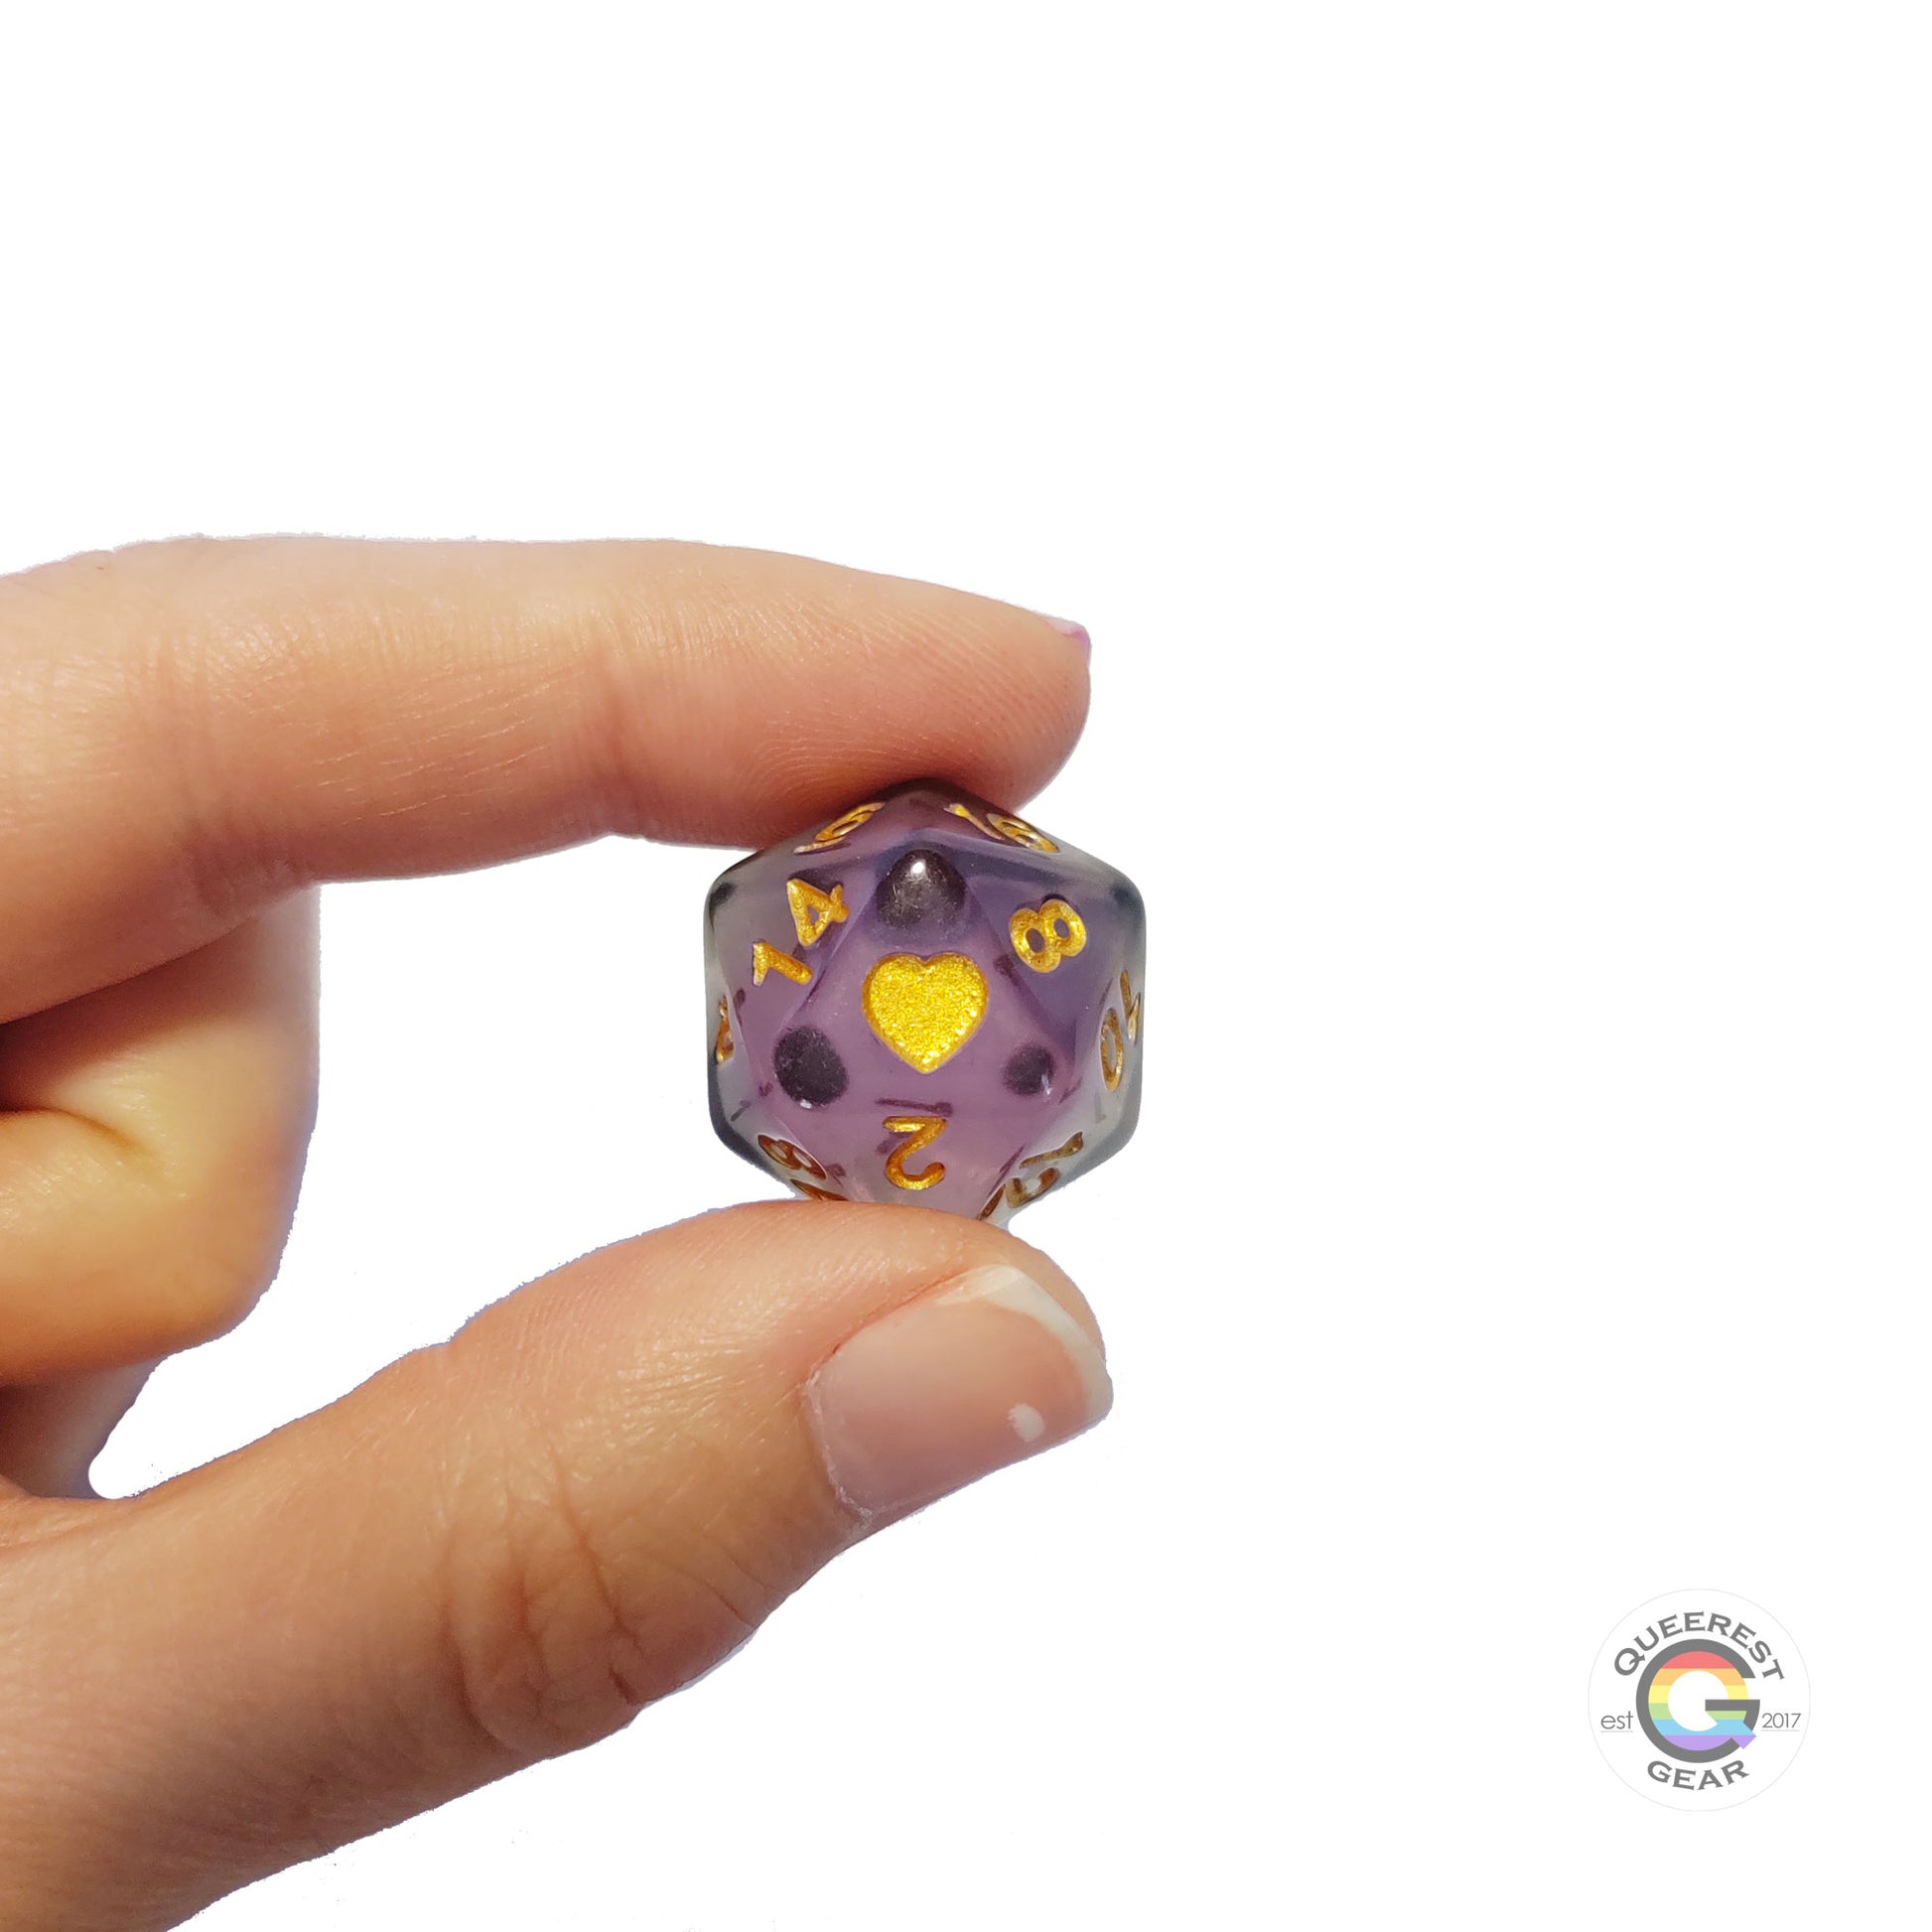 A hand holding up the asexual d20 to show off the color, heart, and transparency